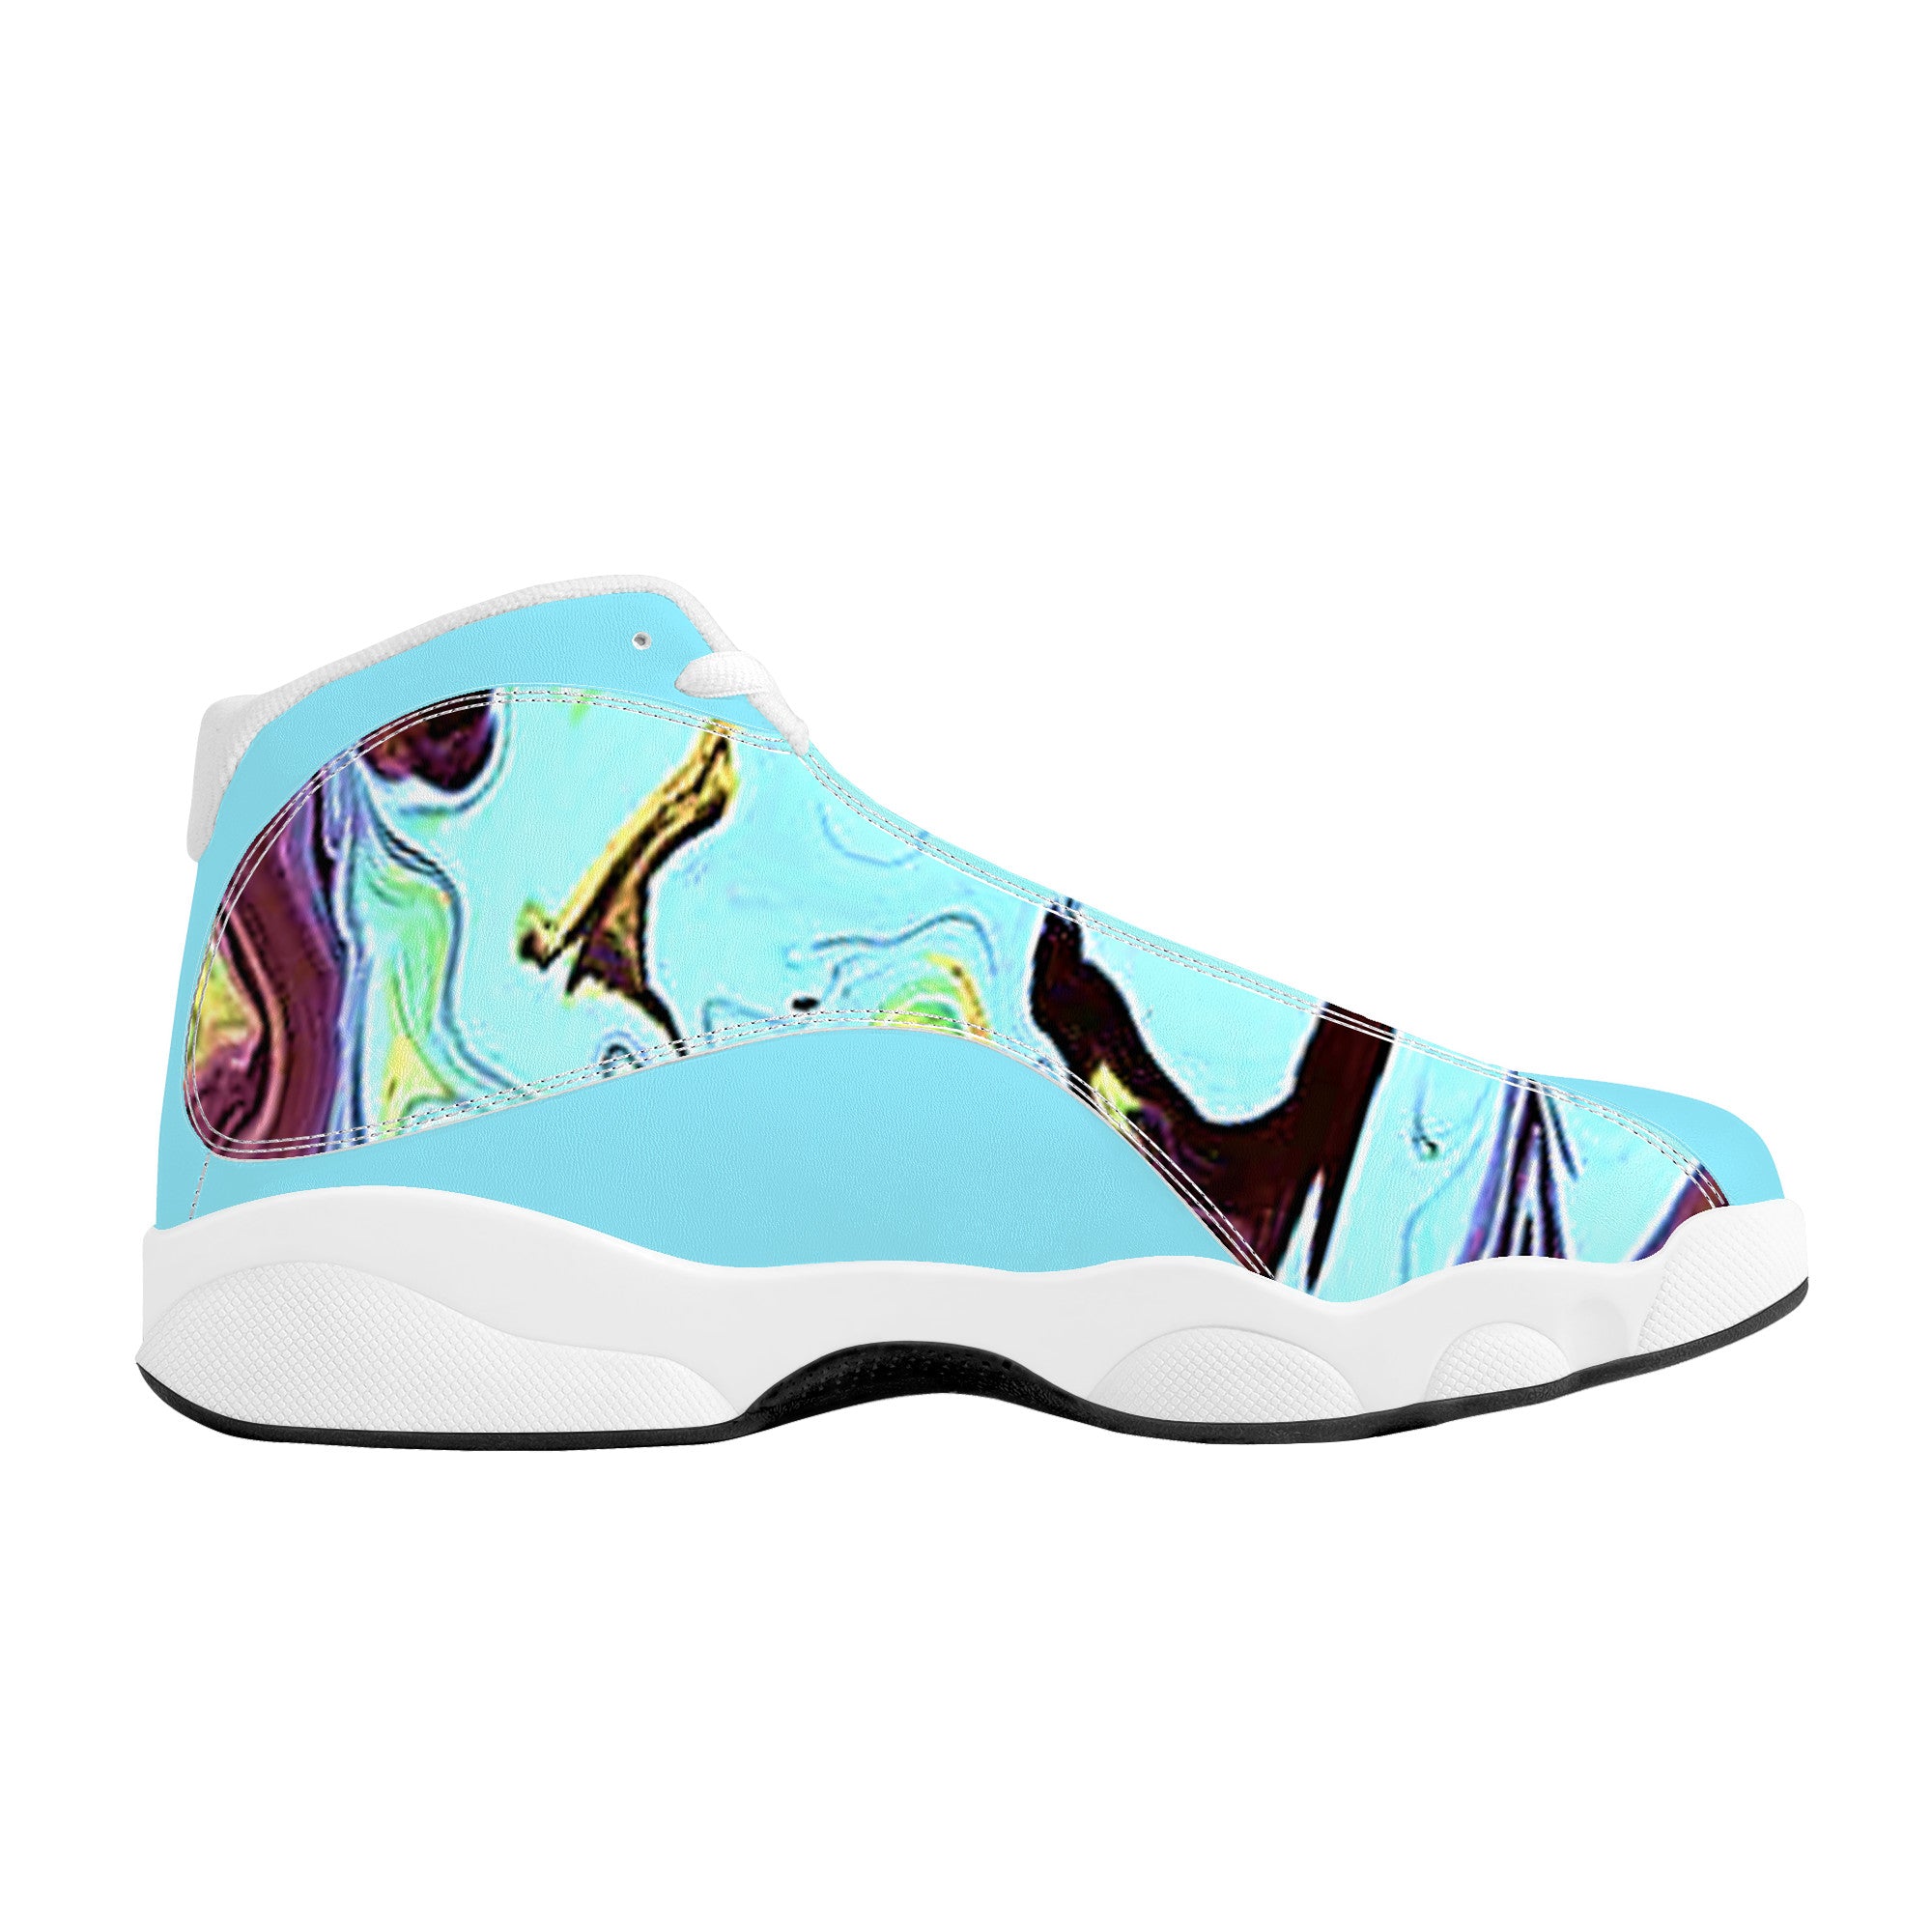 SF_D89 Basketball Shoes - CDEJ Turquoise Marble